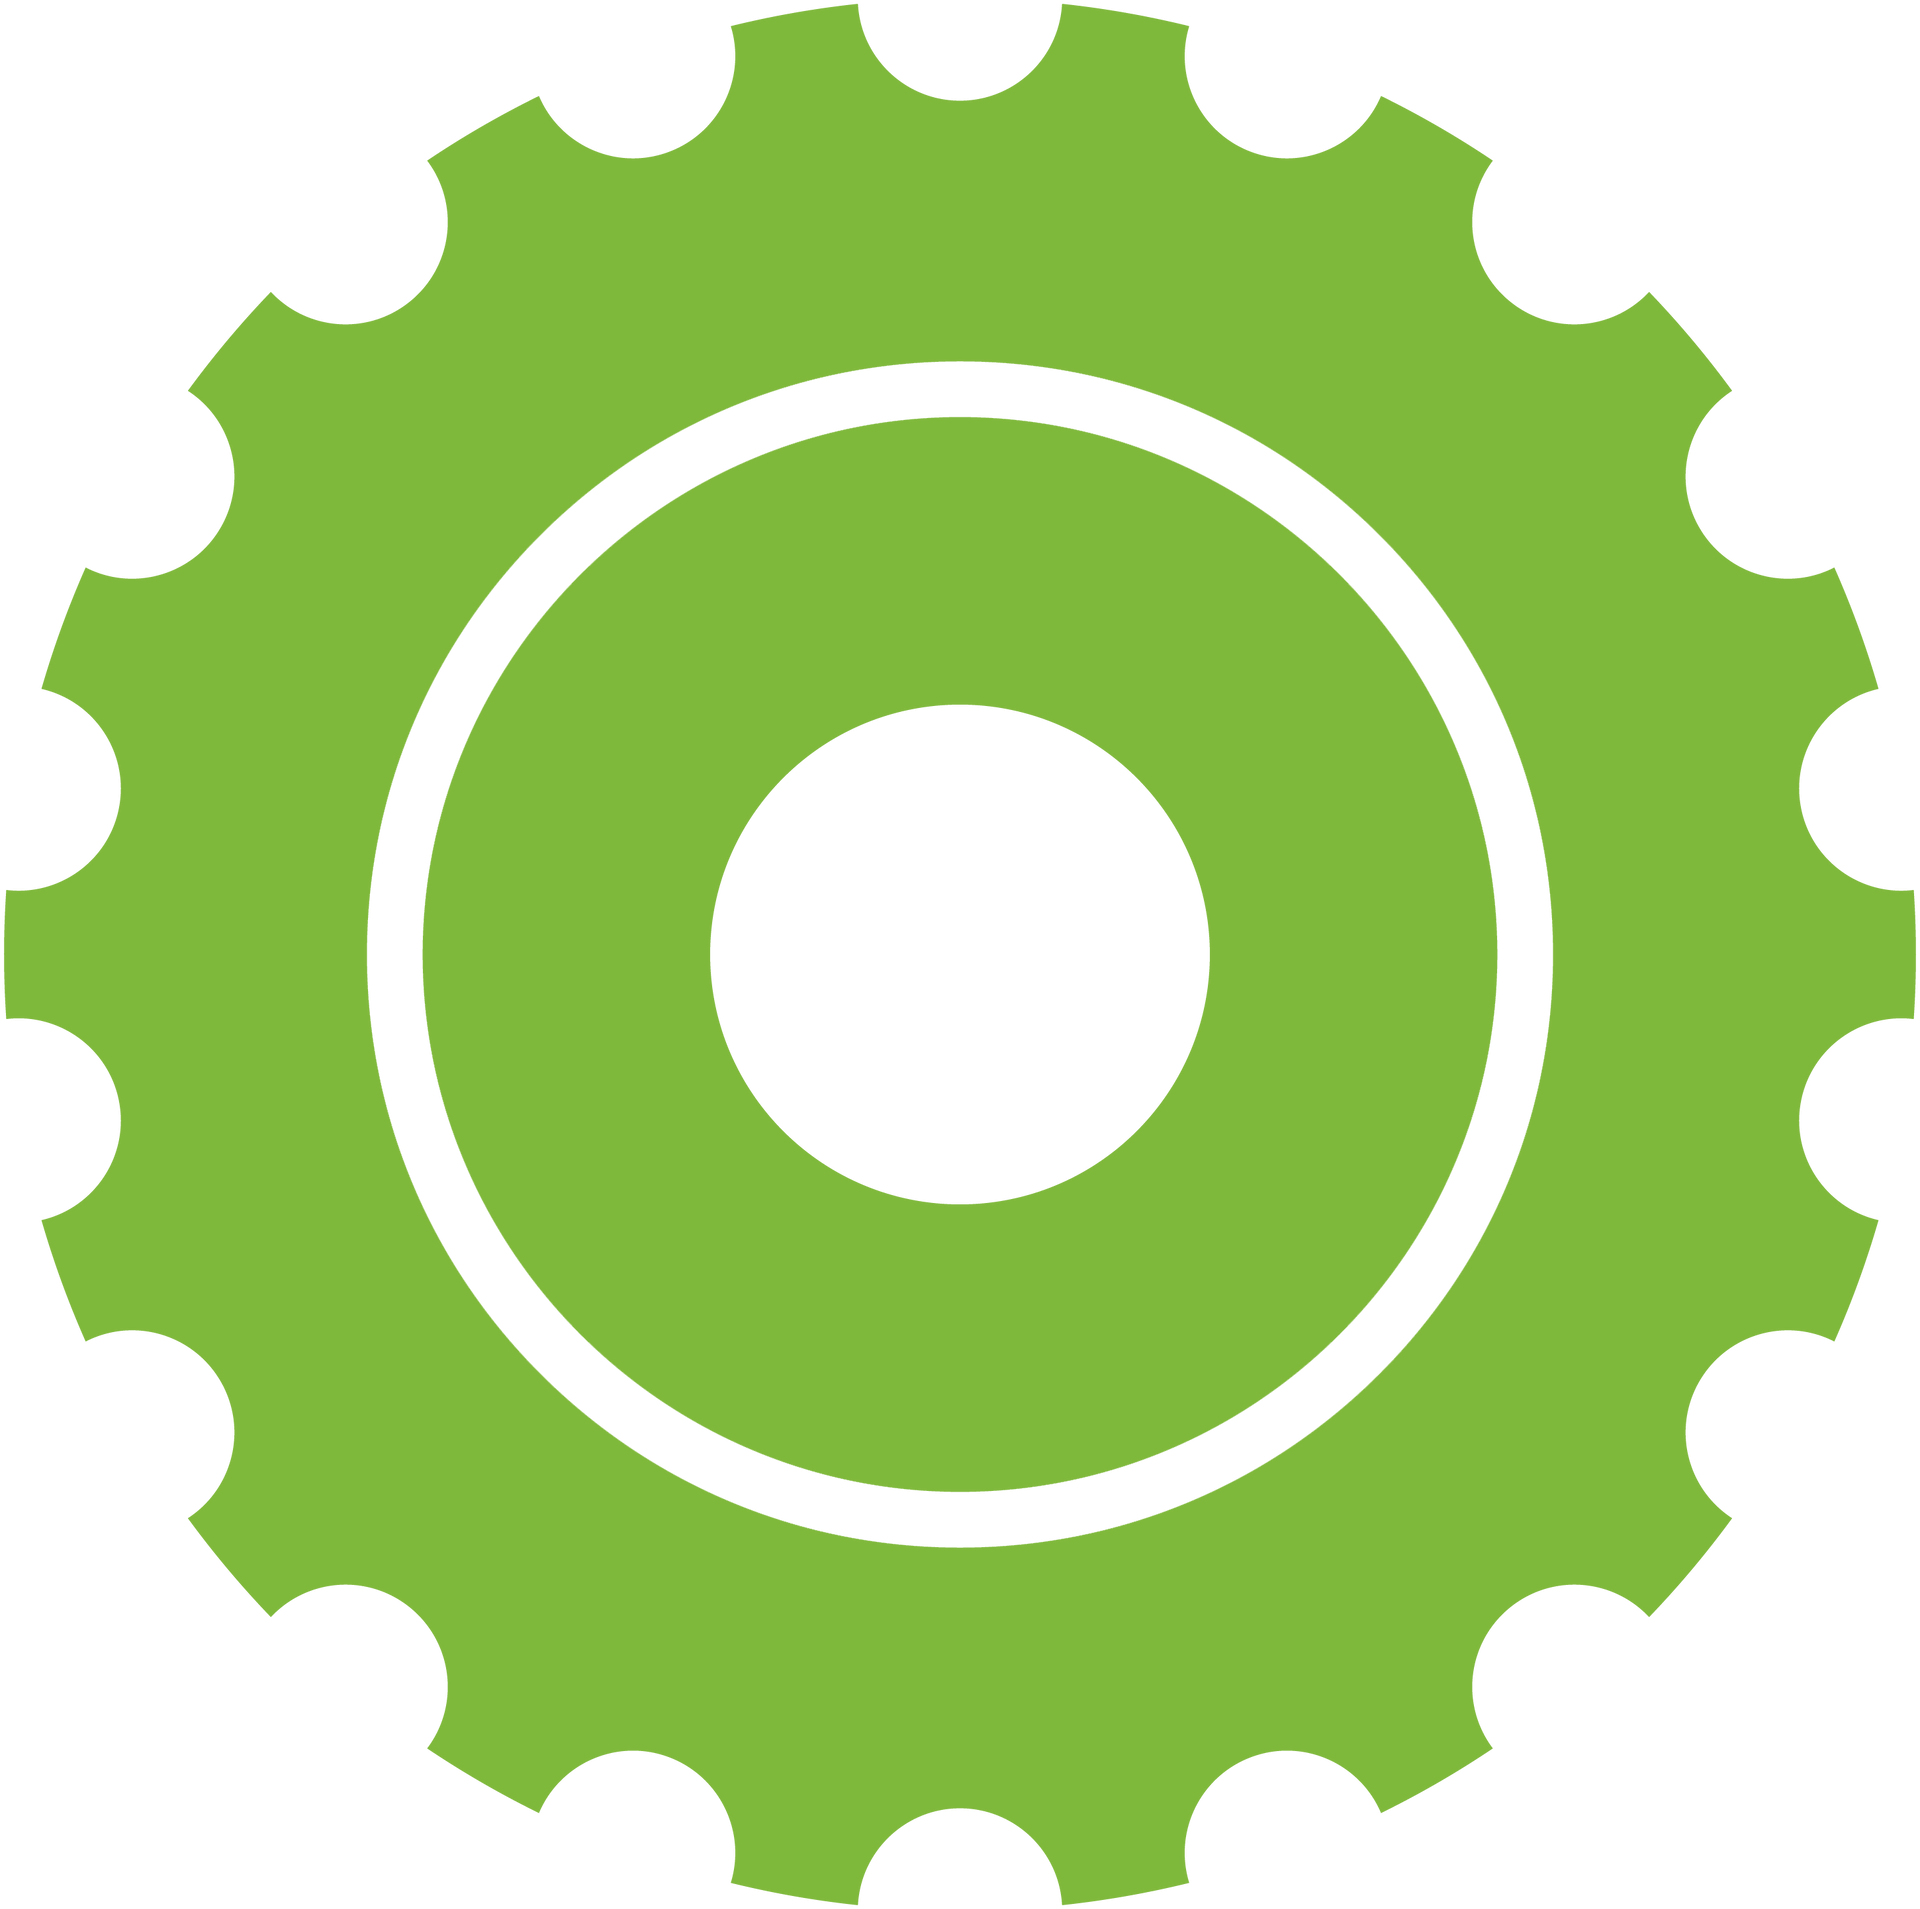 A green gear with a white circle in the middle.